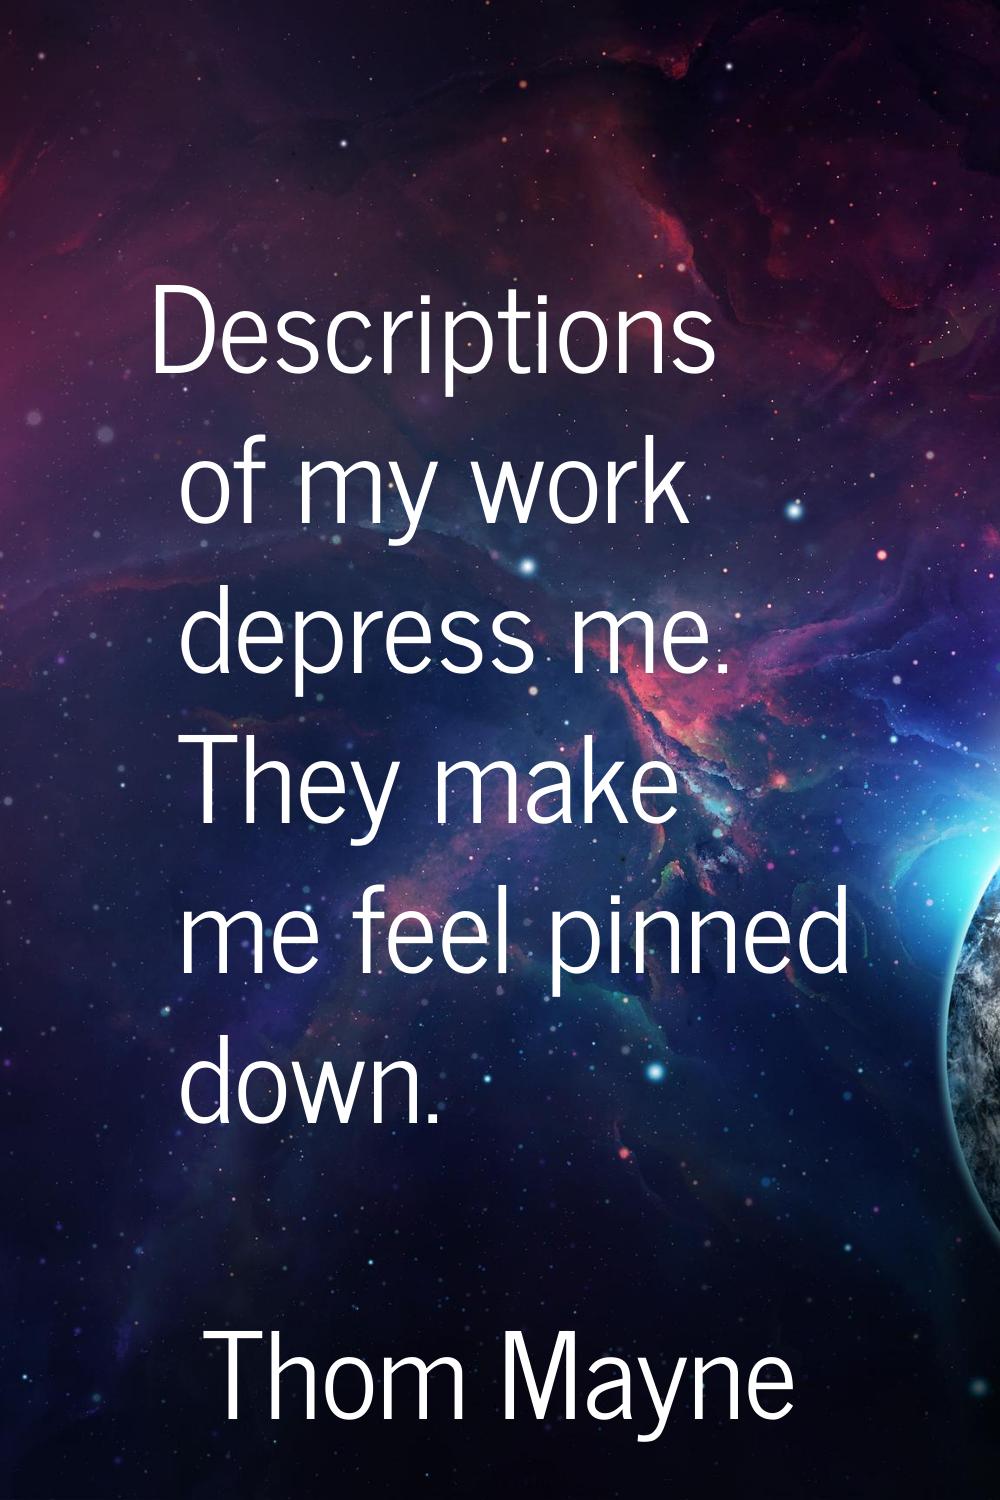 Descriptions of my work depress me. They make me feel pinned down.